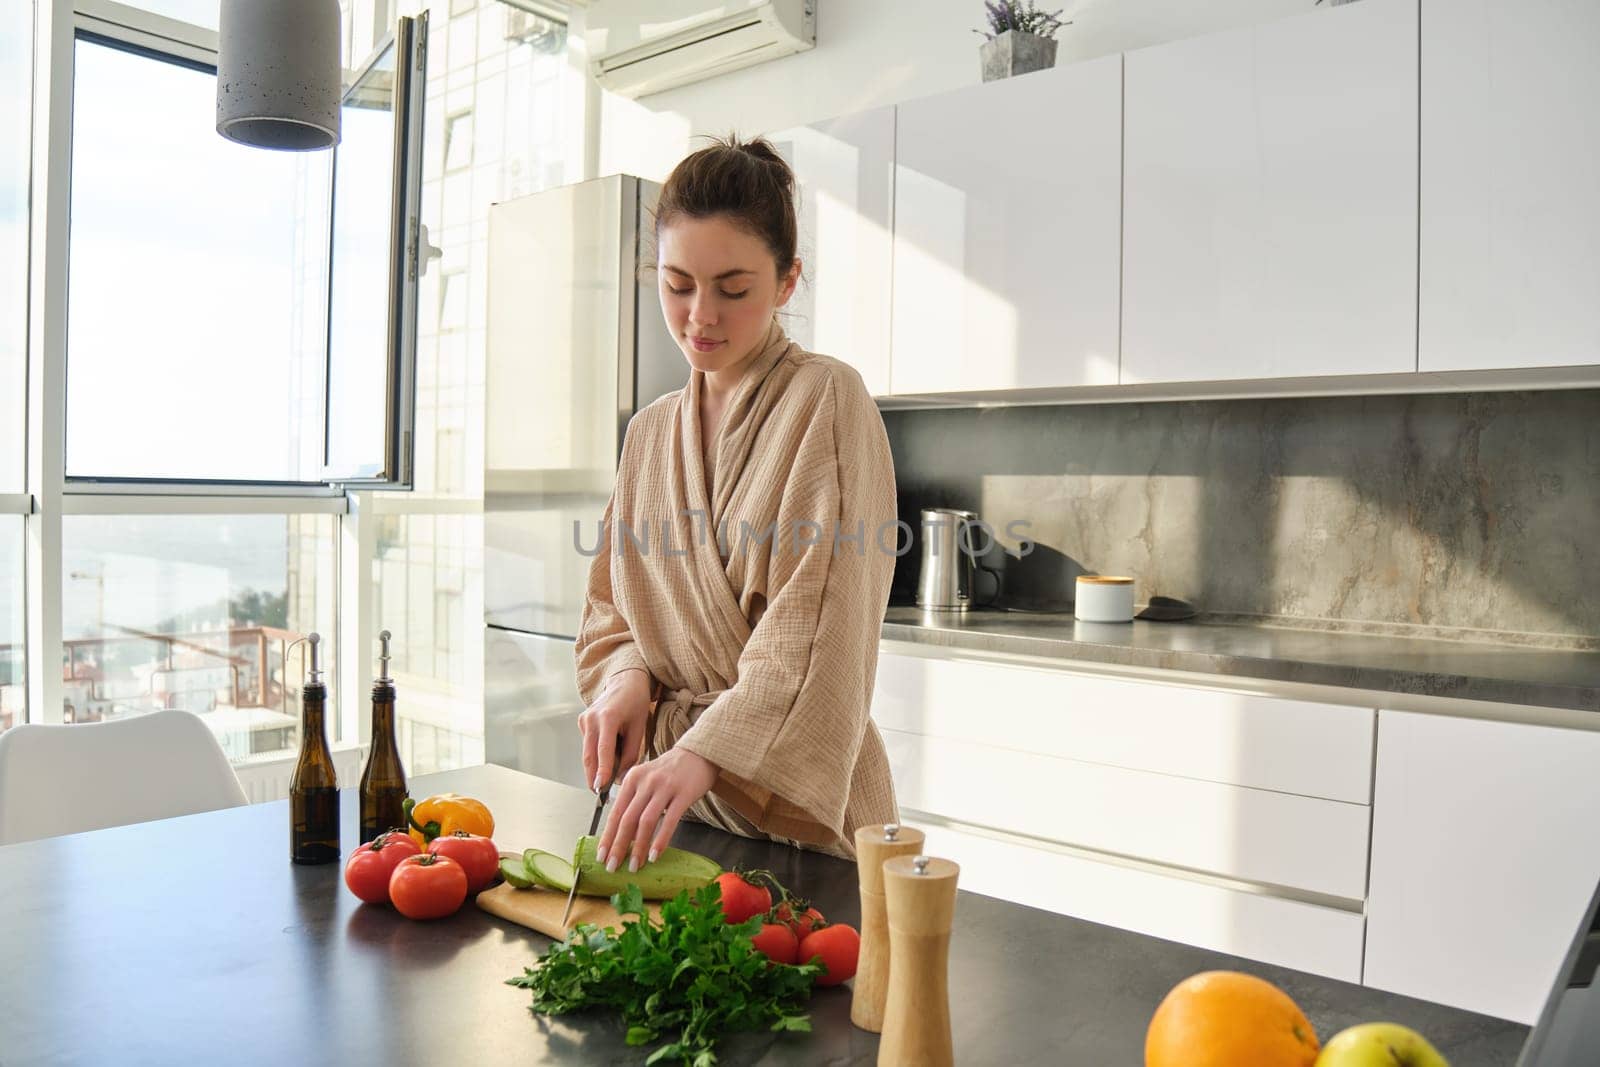 Portrait of woman cooking breakfast, chopping vegetables for salad, using board and knife, standing in the kitchen and wearing bathrobe.